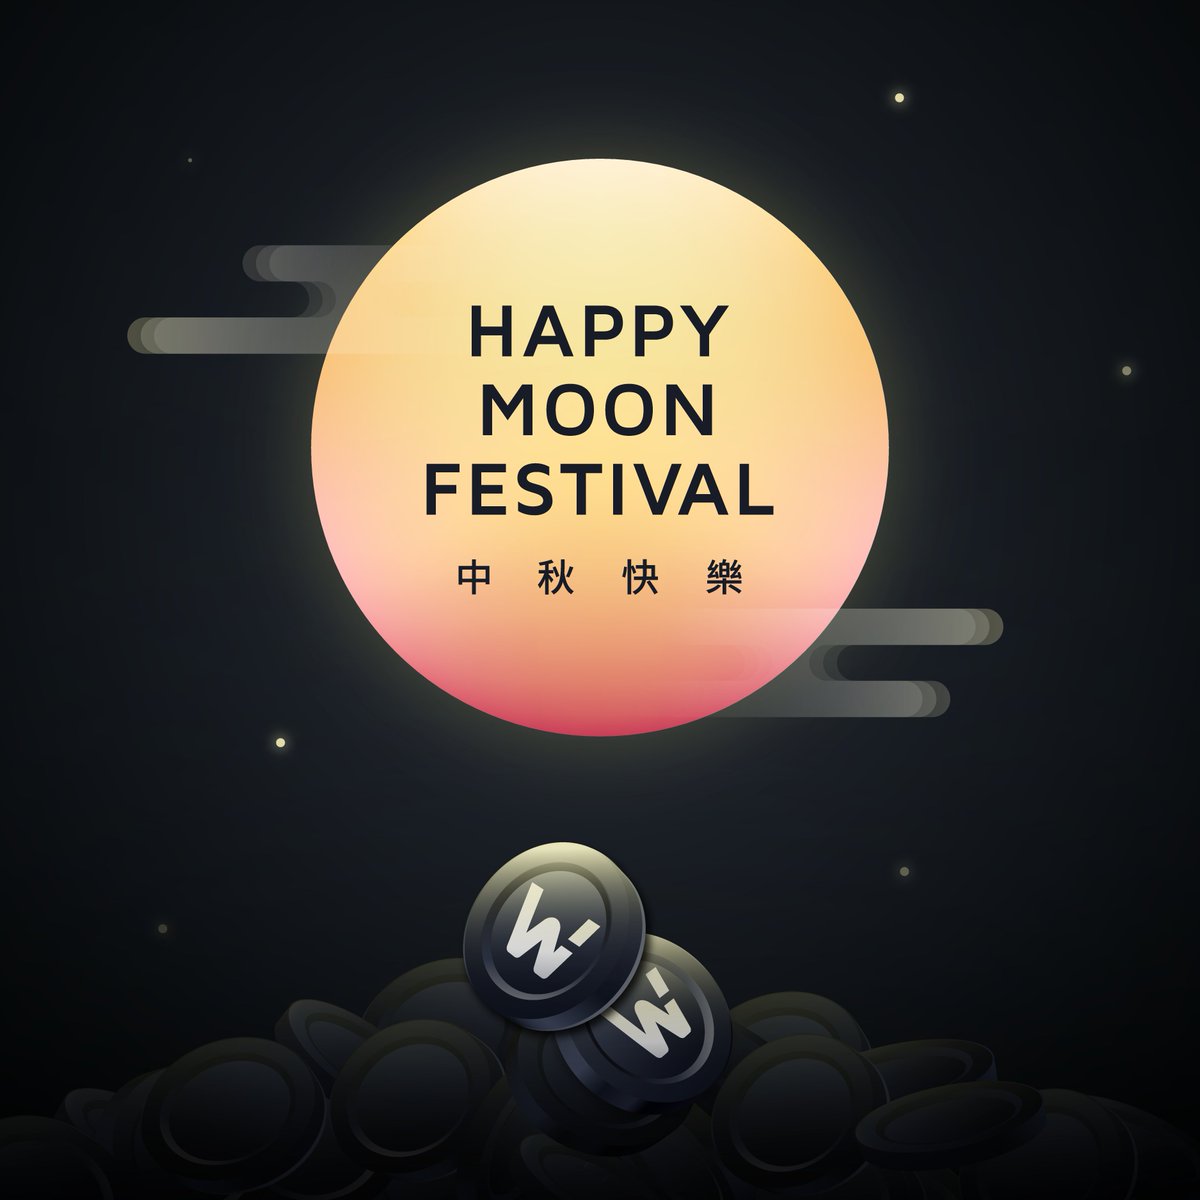 Happy #MoonFestival! 🌕

We hope that your cake is sweet, the moon is bright, and that you and your families have a most wonderful night.